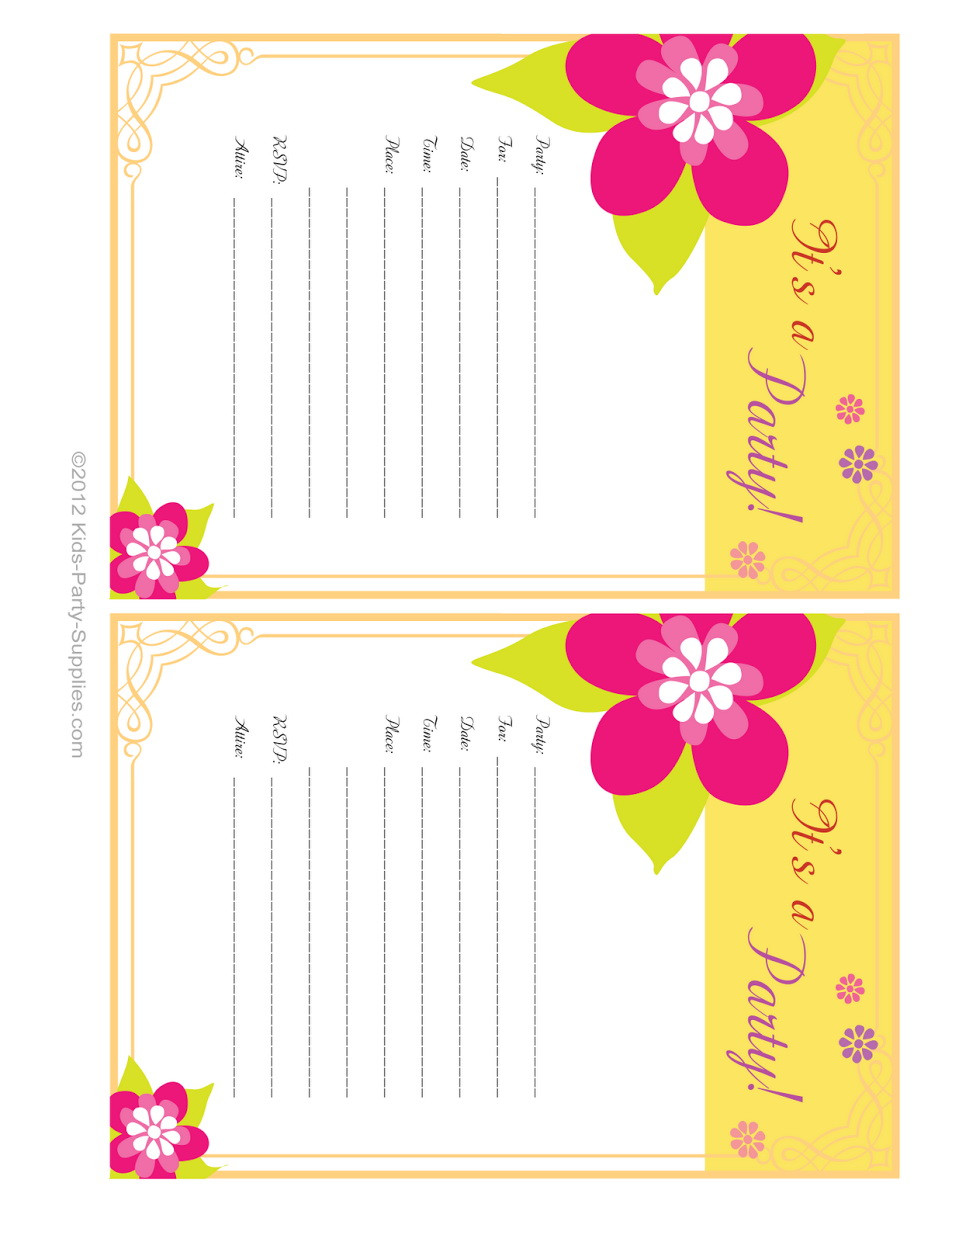 Make Your Own Birthday Invitations Free Printable
 Design your own birthday invitations design your own